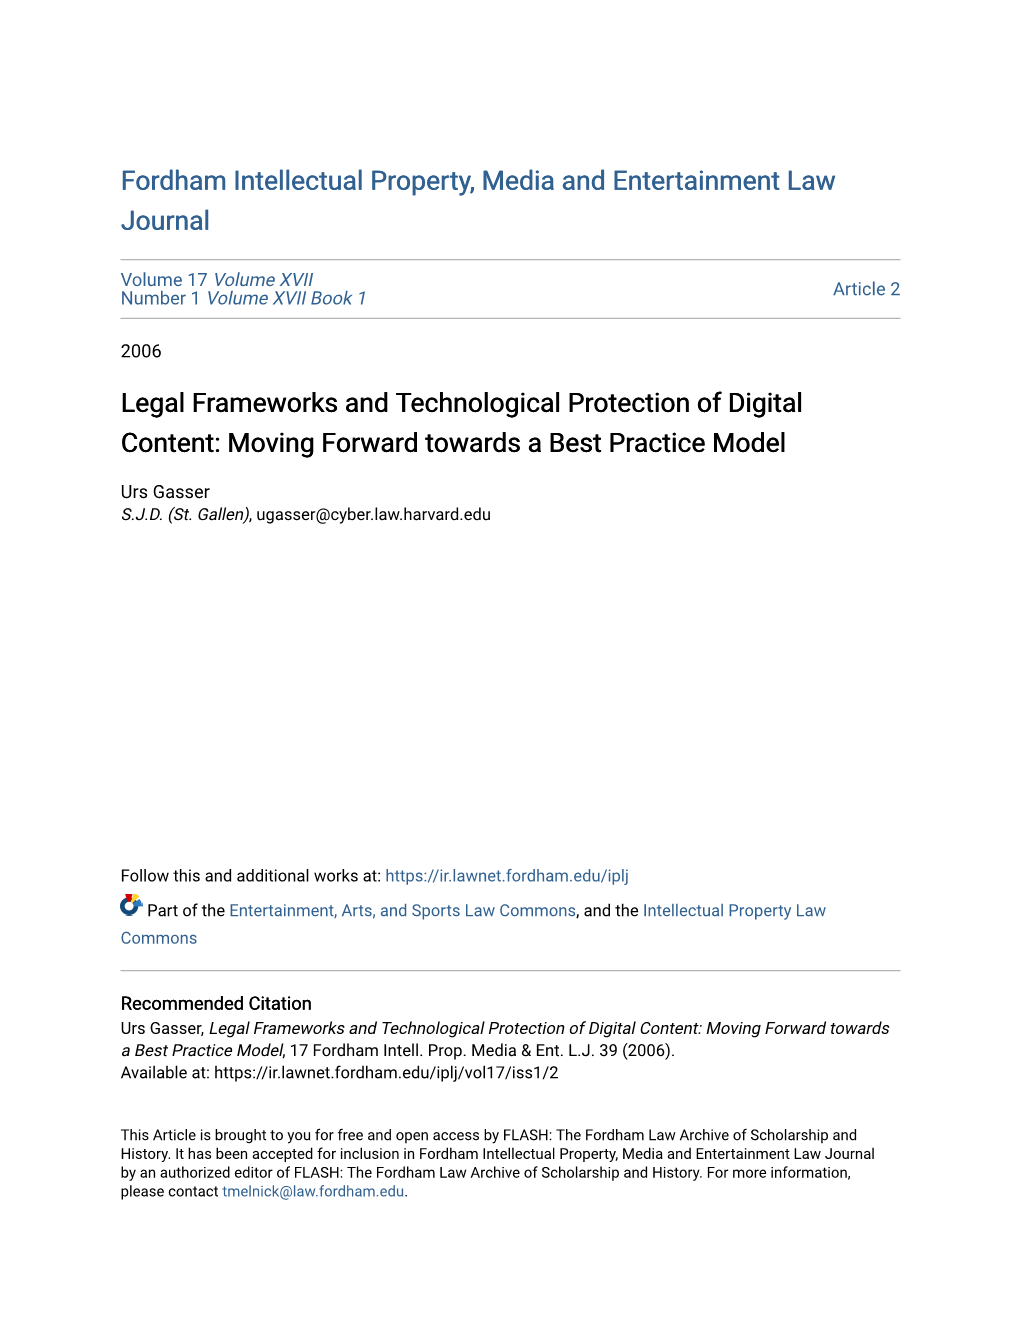 Legal Frameworks and Technological Protection of Digital Content: Moving Forward Towards a Best Practice Model